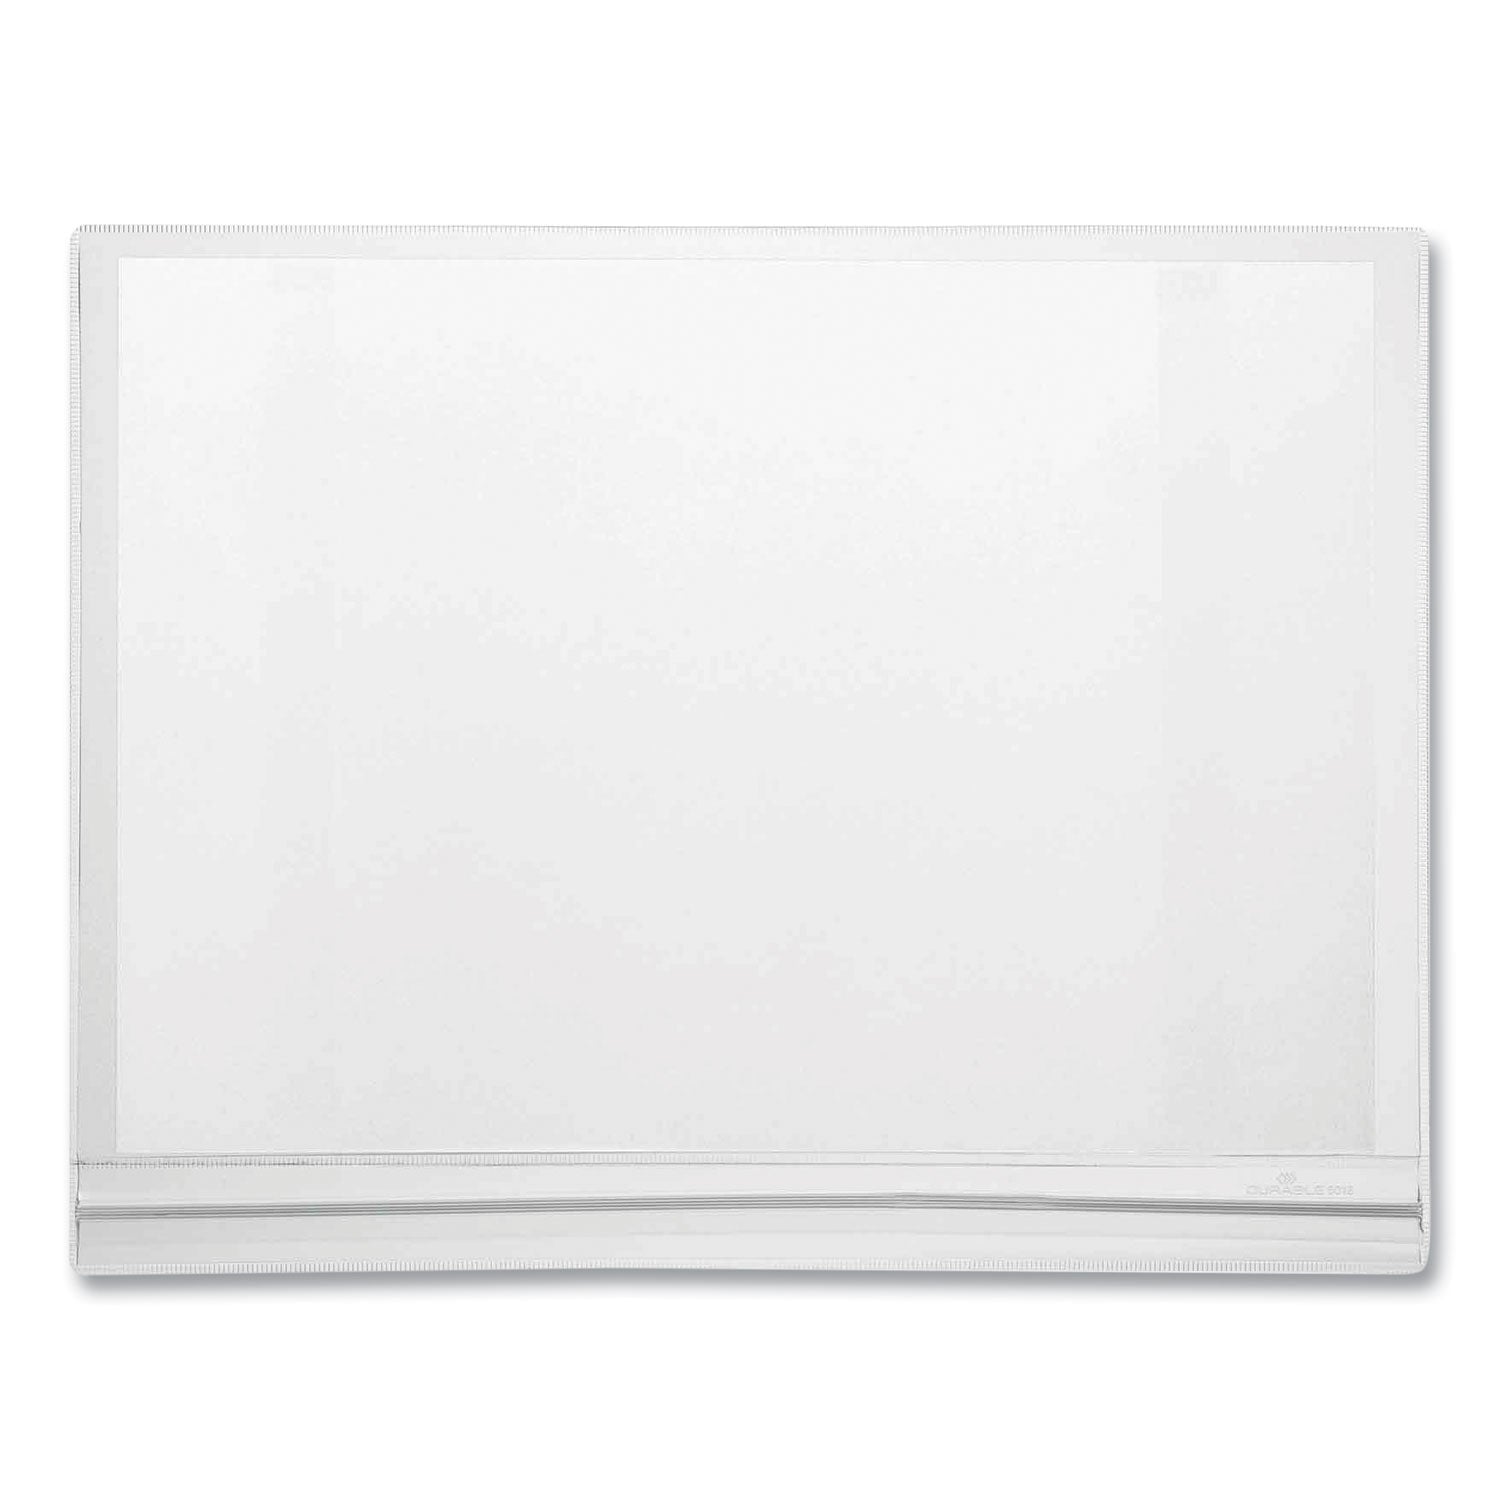 magnetic-water-resistant-sign-holder-85-x-11-clear-frame-5-pack_dbl501819 - 3